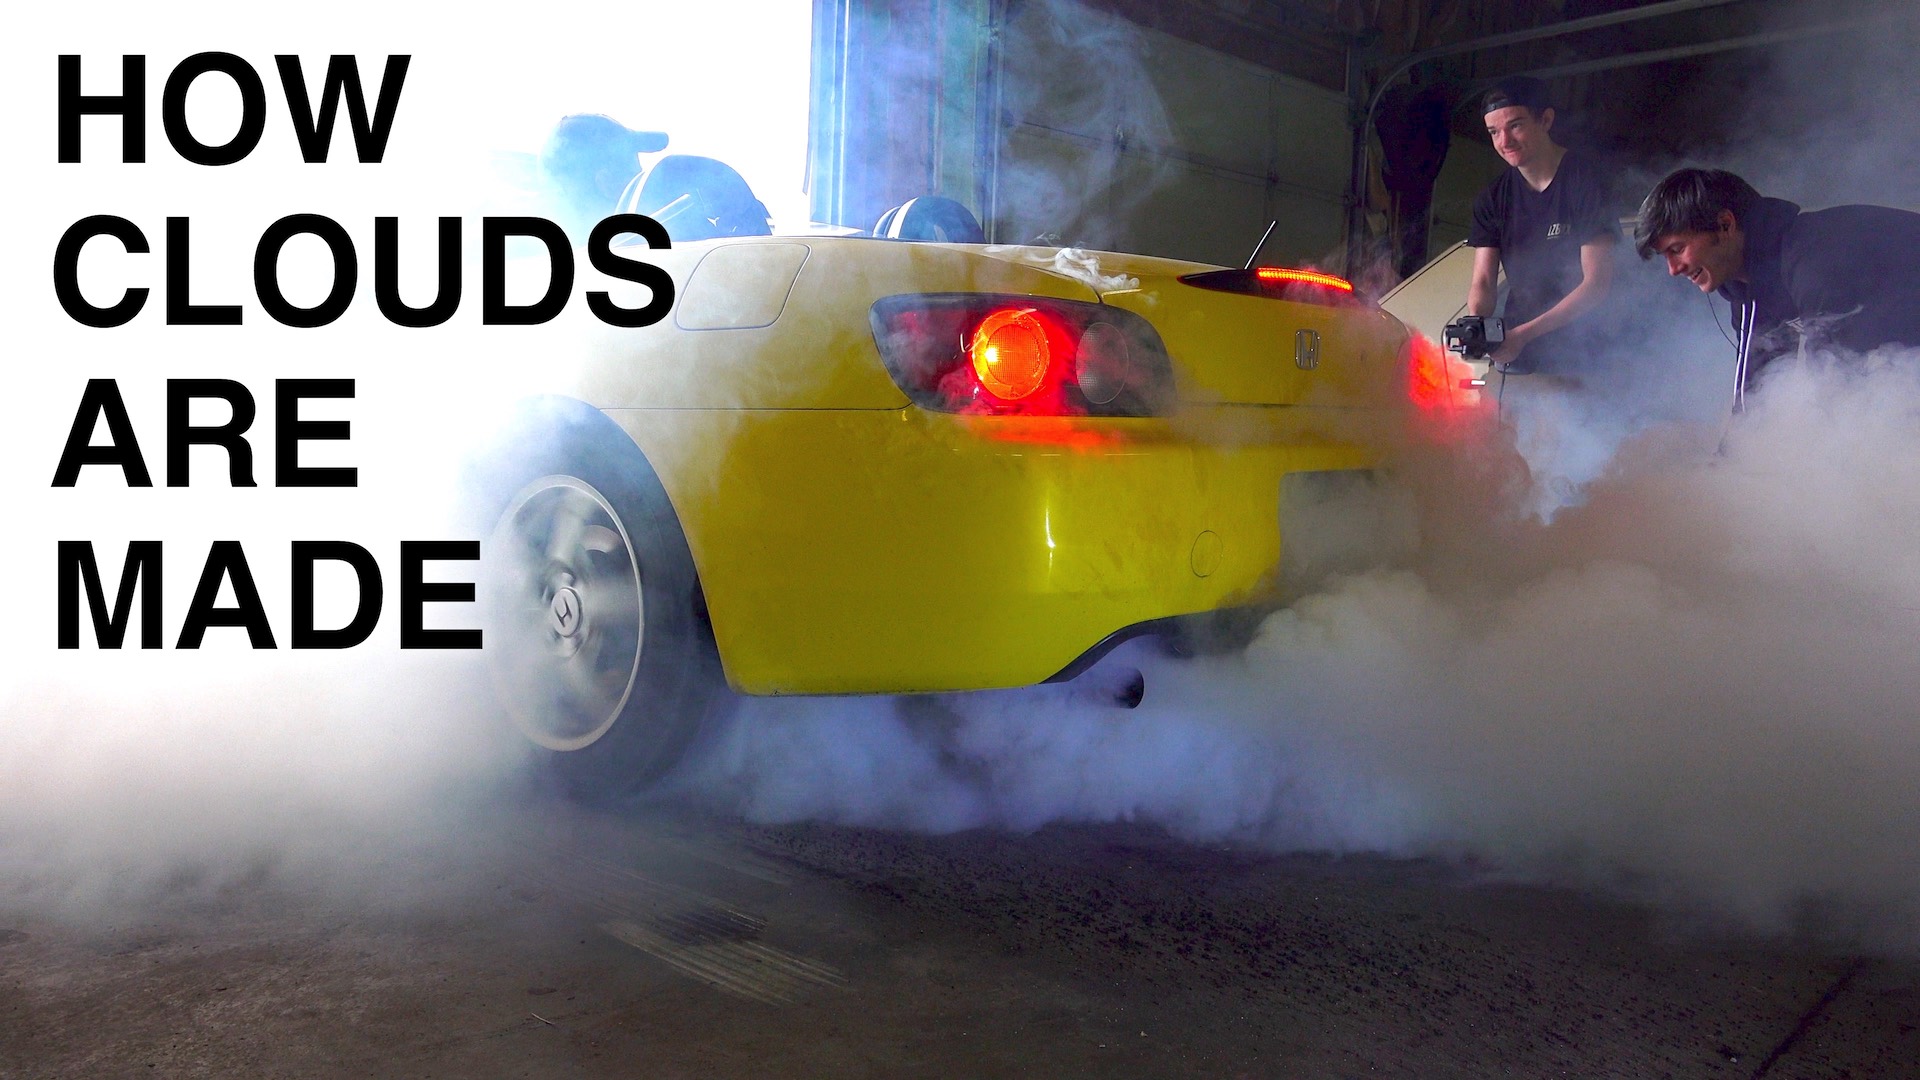 How To Do A Burnout In A Automatic Car